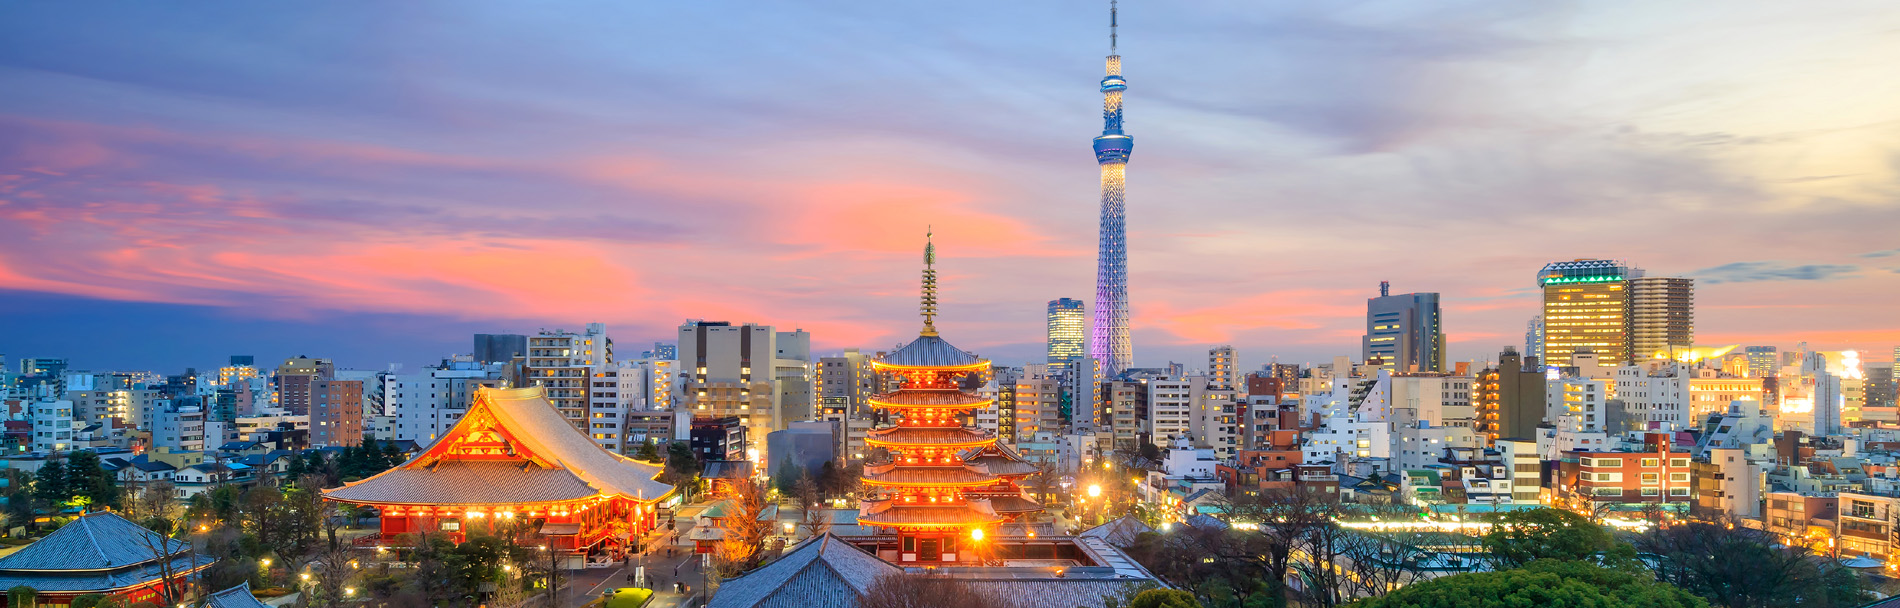 Japan Tour Package - 5 Nights